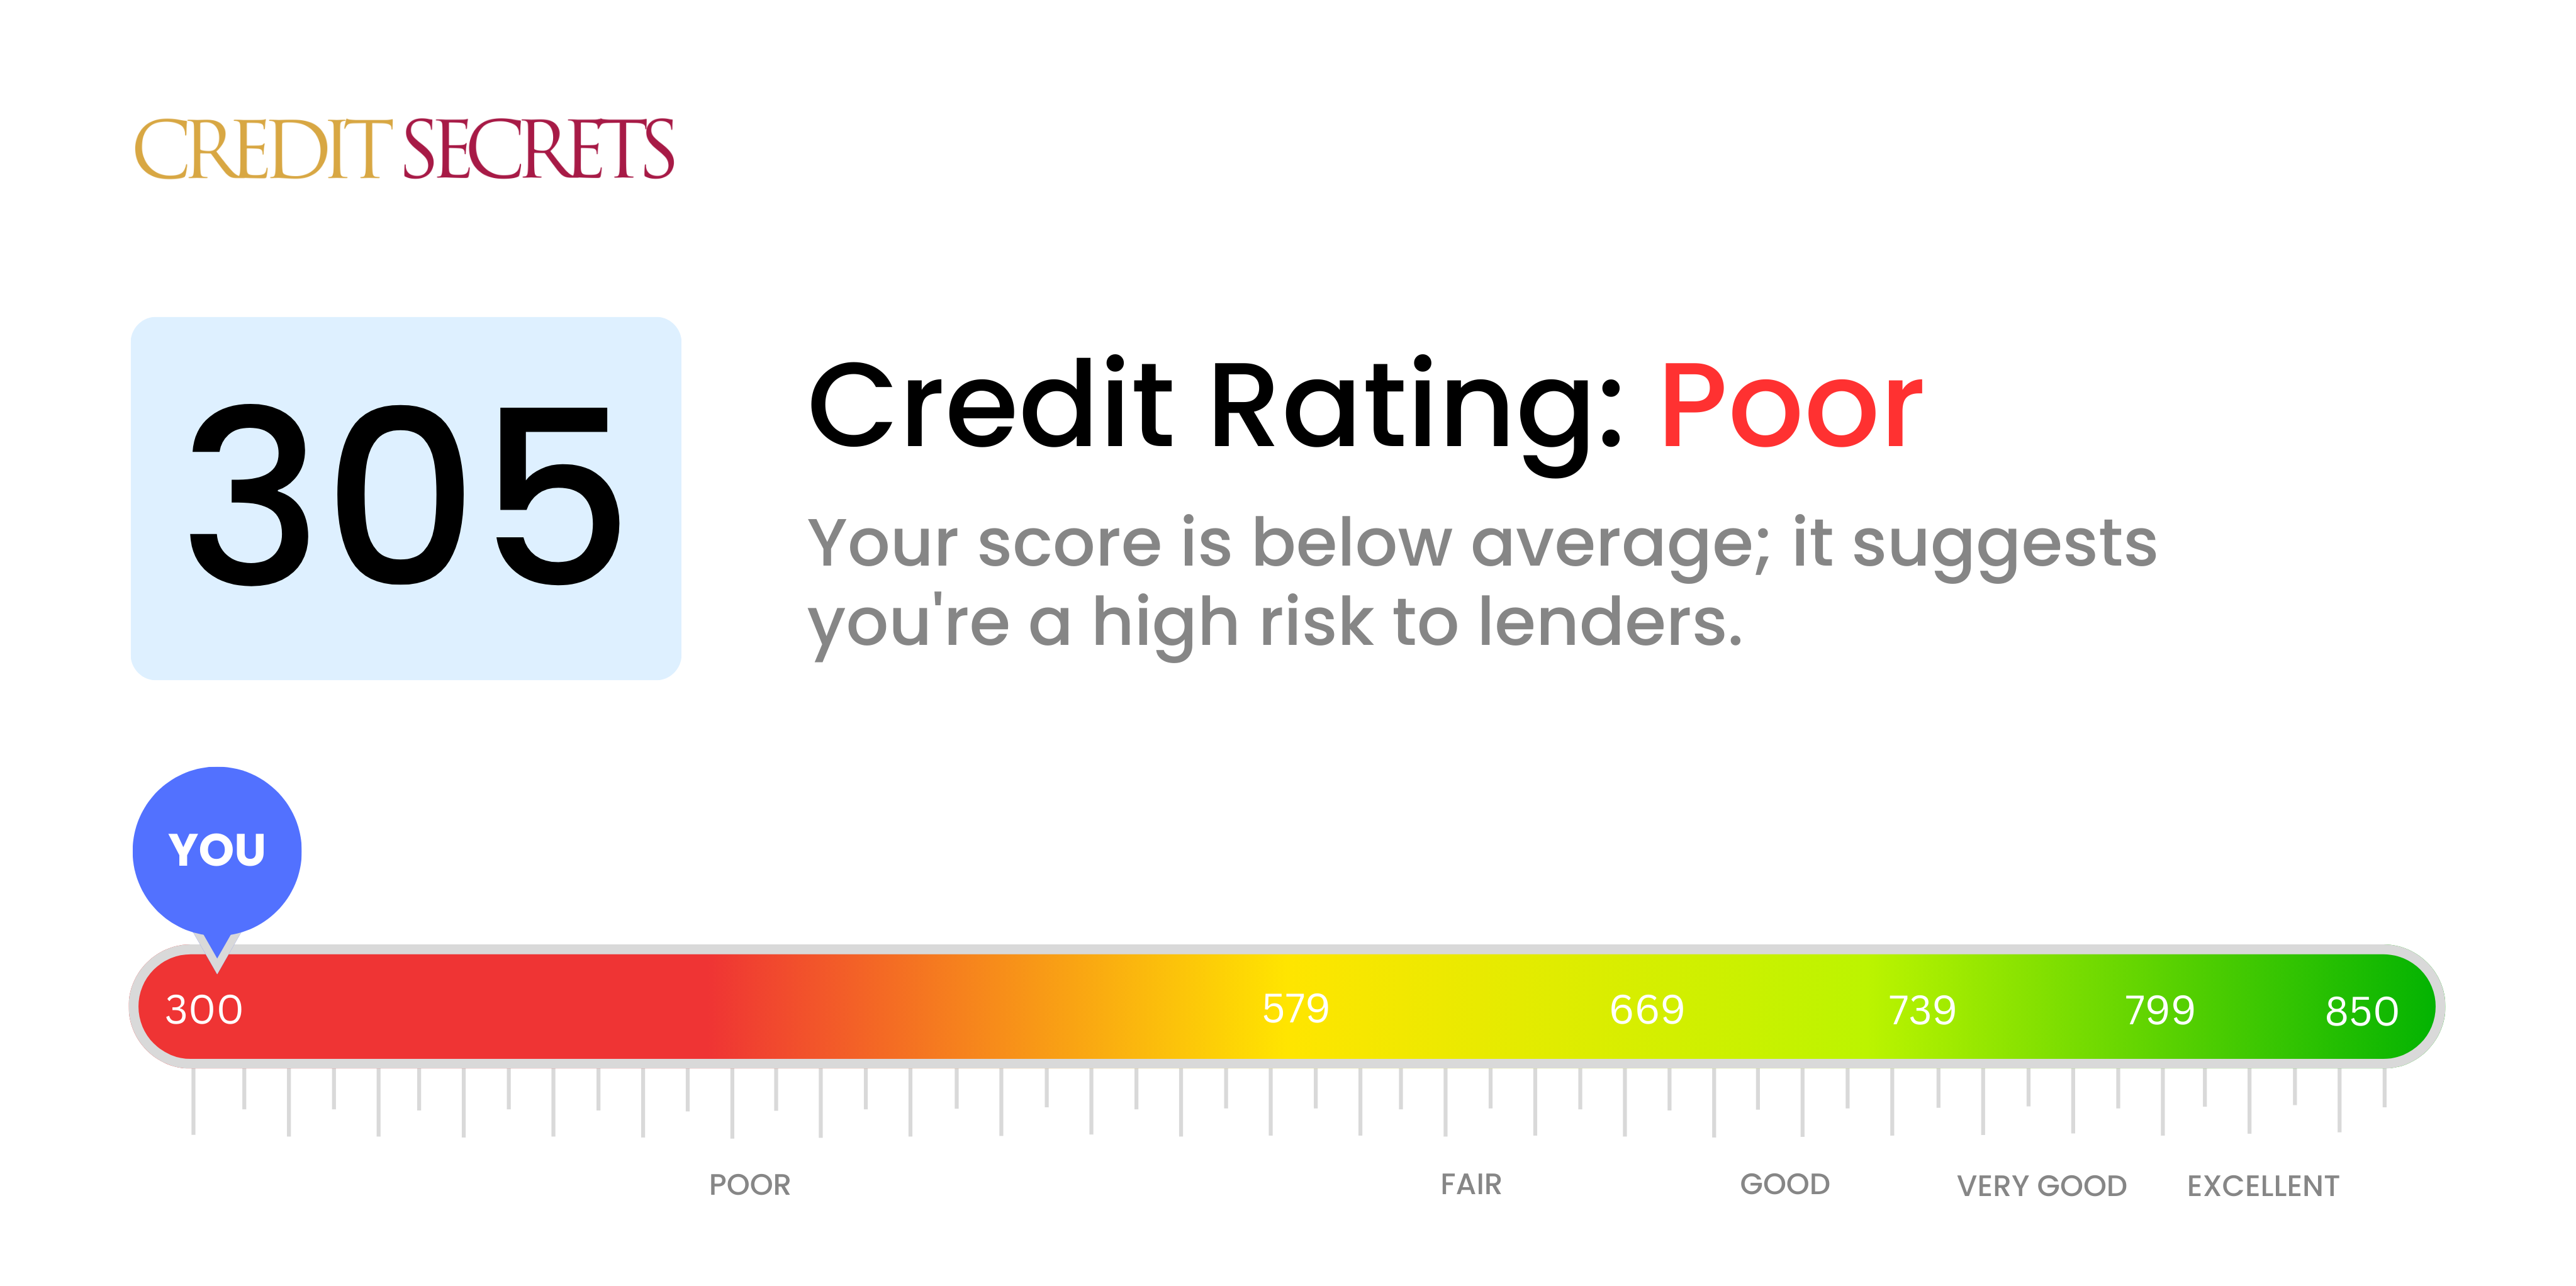 Is 305 a good credit score?